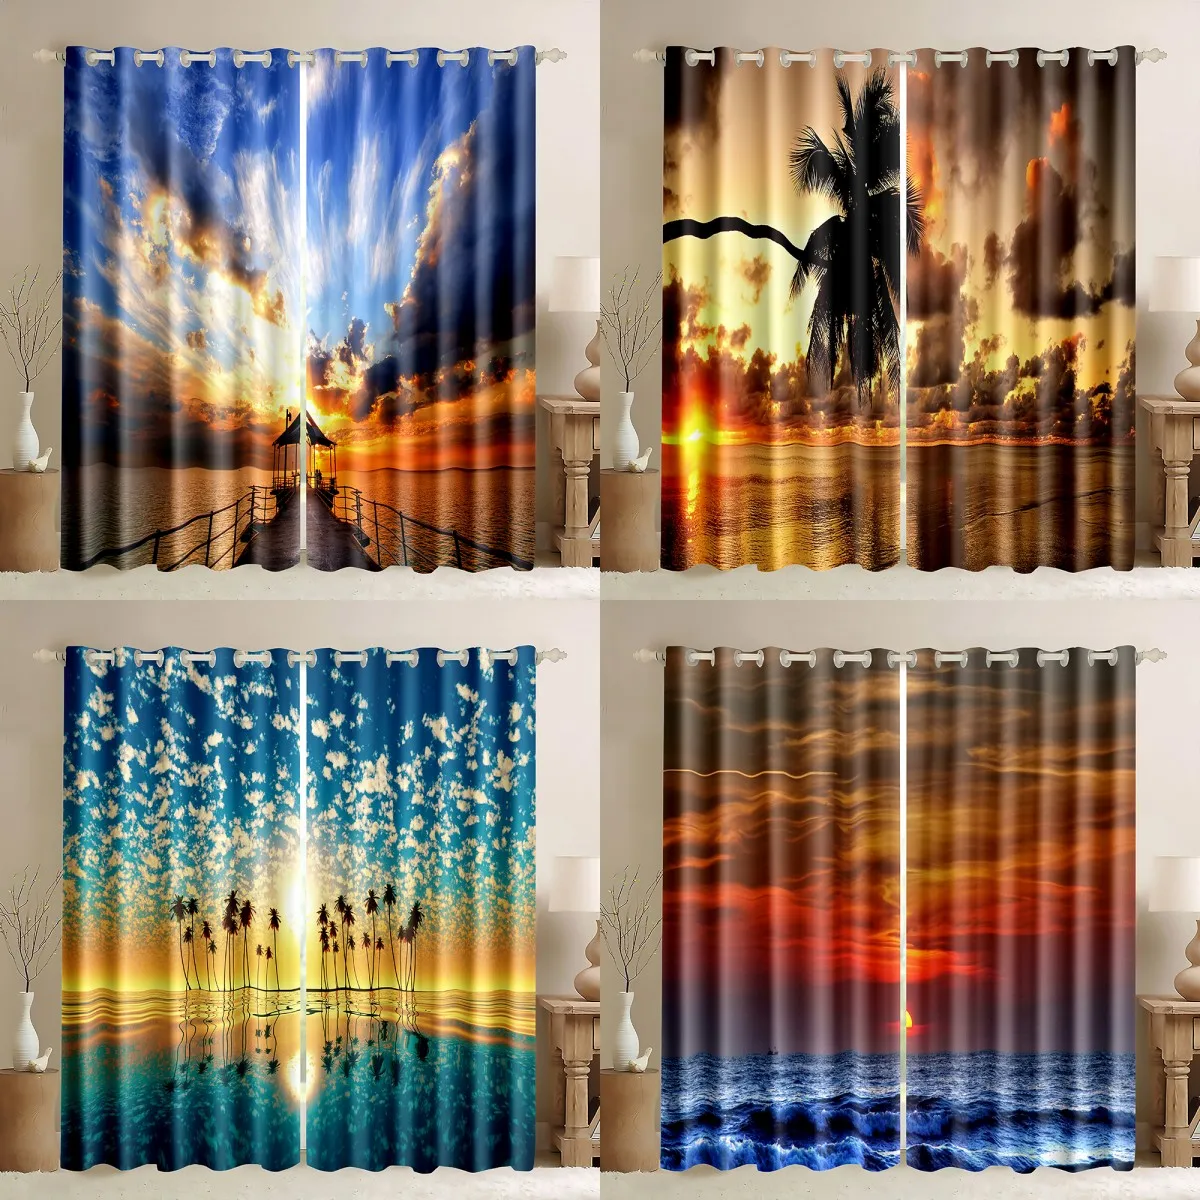 

Ocean Beach Sunset Palm Trees 90% Blackout Curtains Tropical Island Decor Seaside Thick Window Drapes for Bedroom Living Room